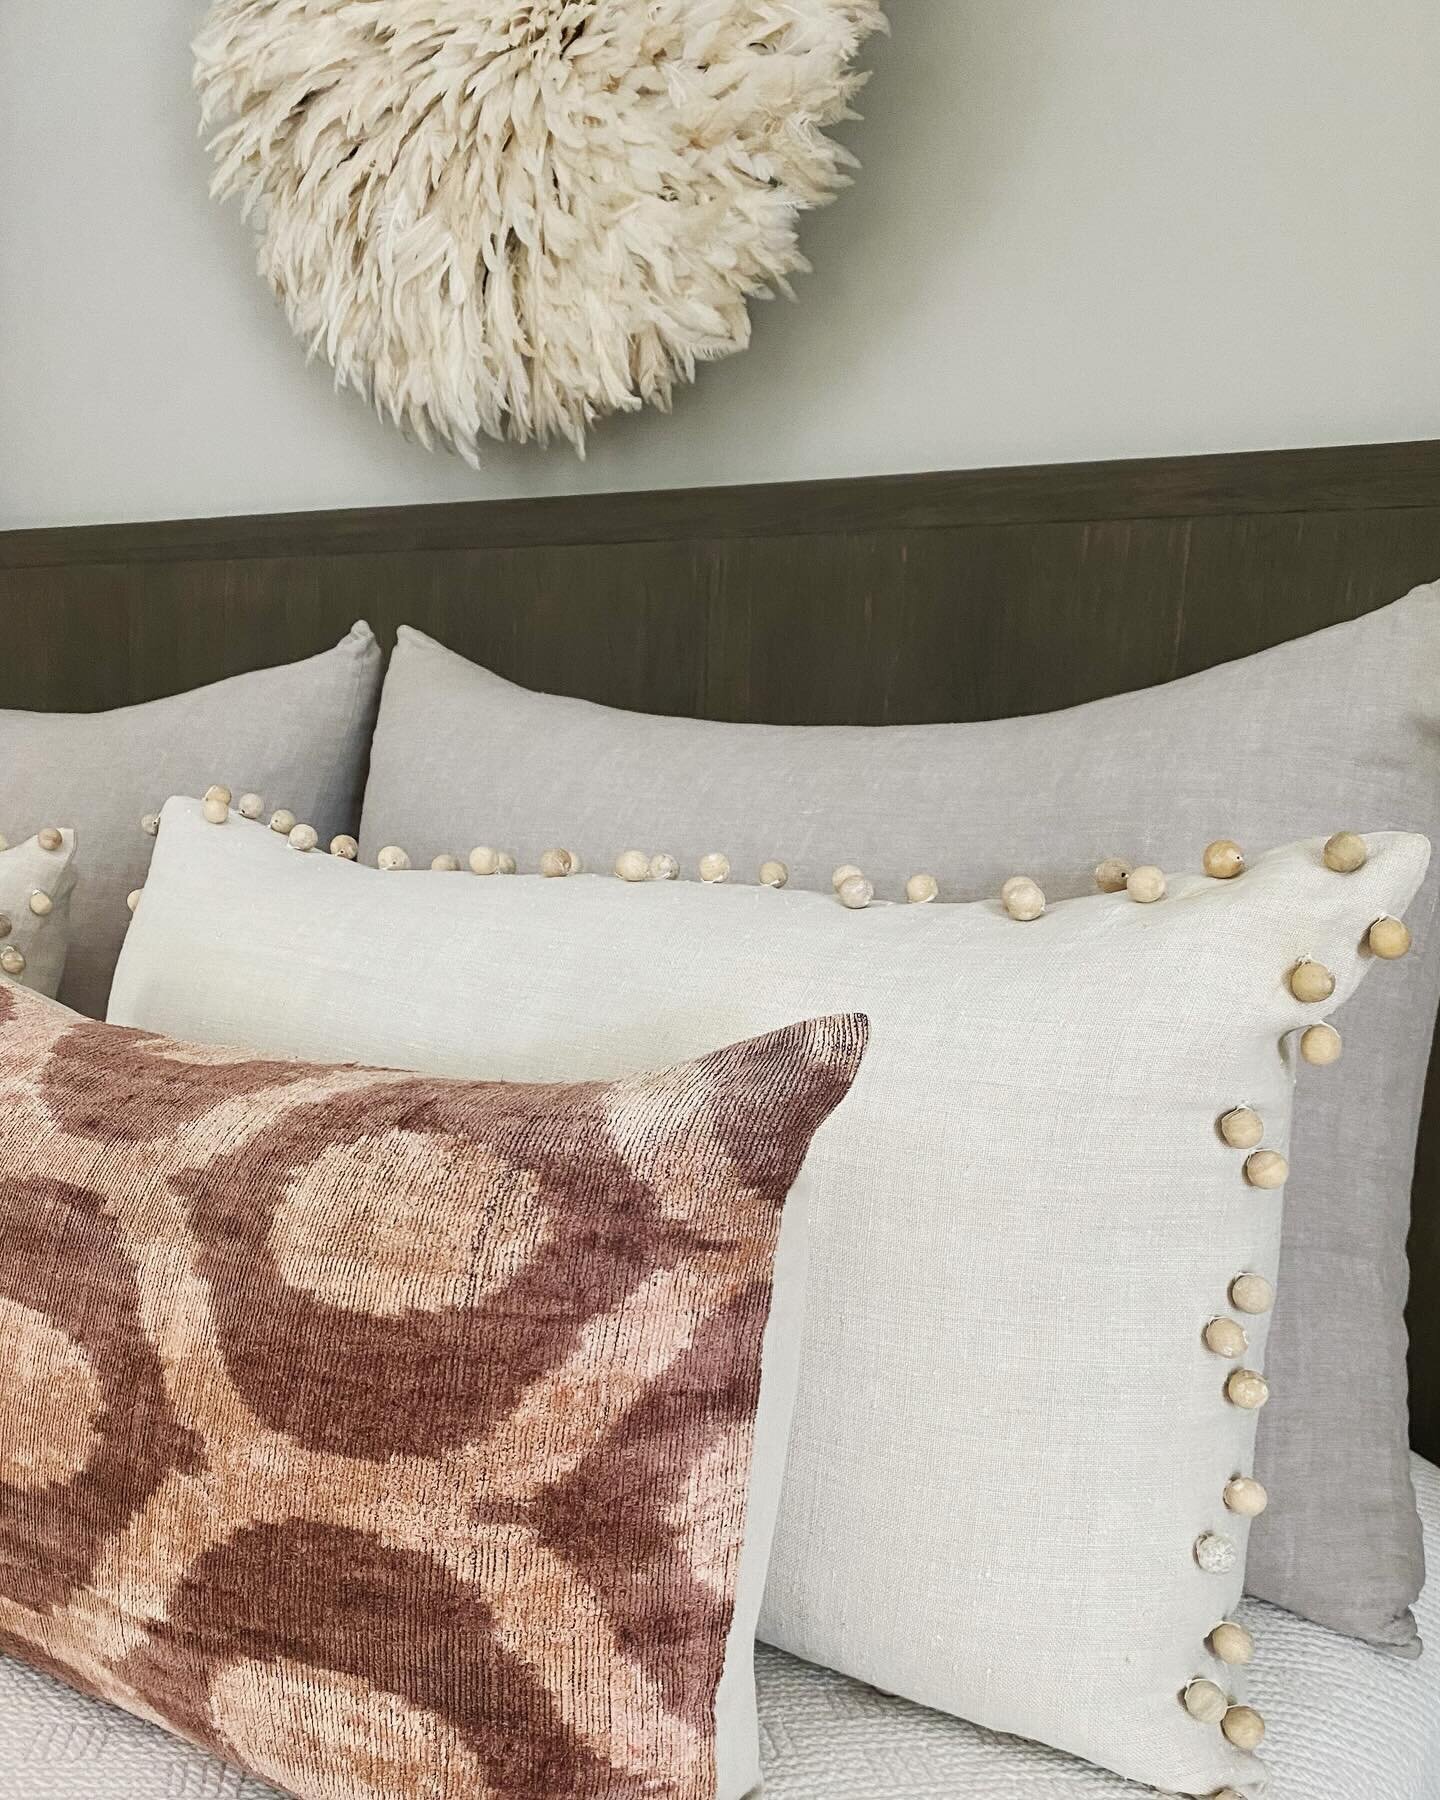 We love how the wood beaded trim adds dimension and interest to a basic linen pillow 🤩 
.
.
.
#beadeddetail #bedding #custom #custompillows #interiordesign #interiordecor #interiorphilosophy #interiorphilosophyatl